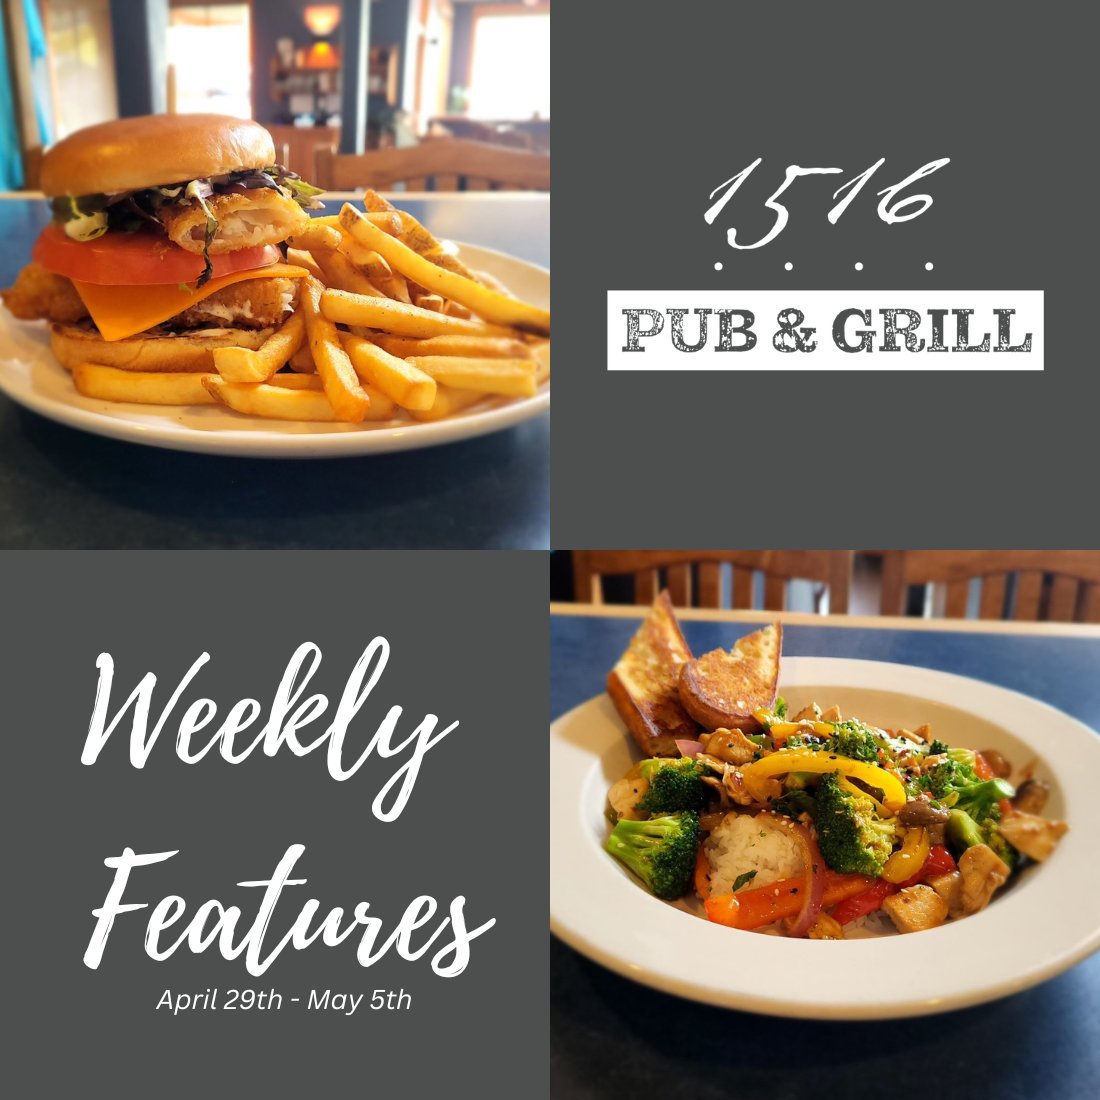 Have you had a chance to try this weeks Features?? Get them soon, they will be gone by May 5th!!

#1516pubandgrill #vernoncatering #waterfront #events #weddings #vernonbc #vernonfoodie #vernoneats #datenight #skipthedishes